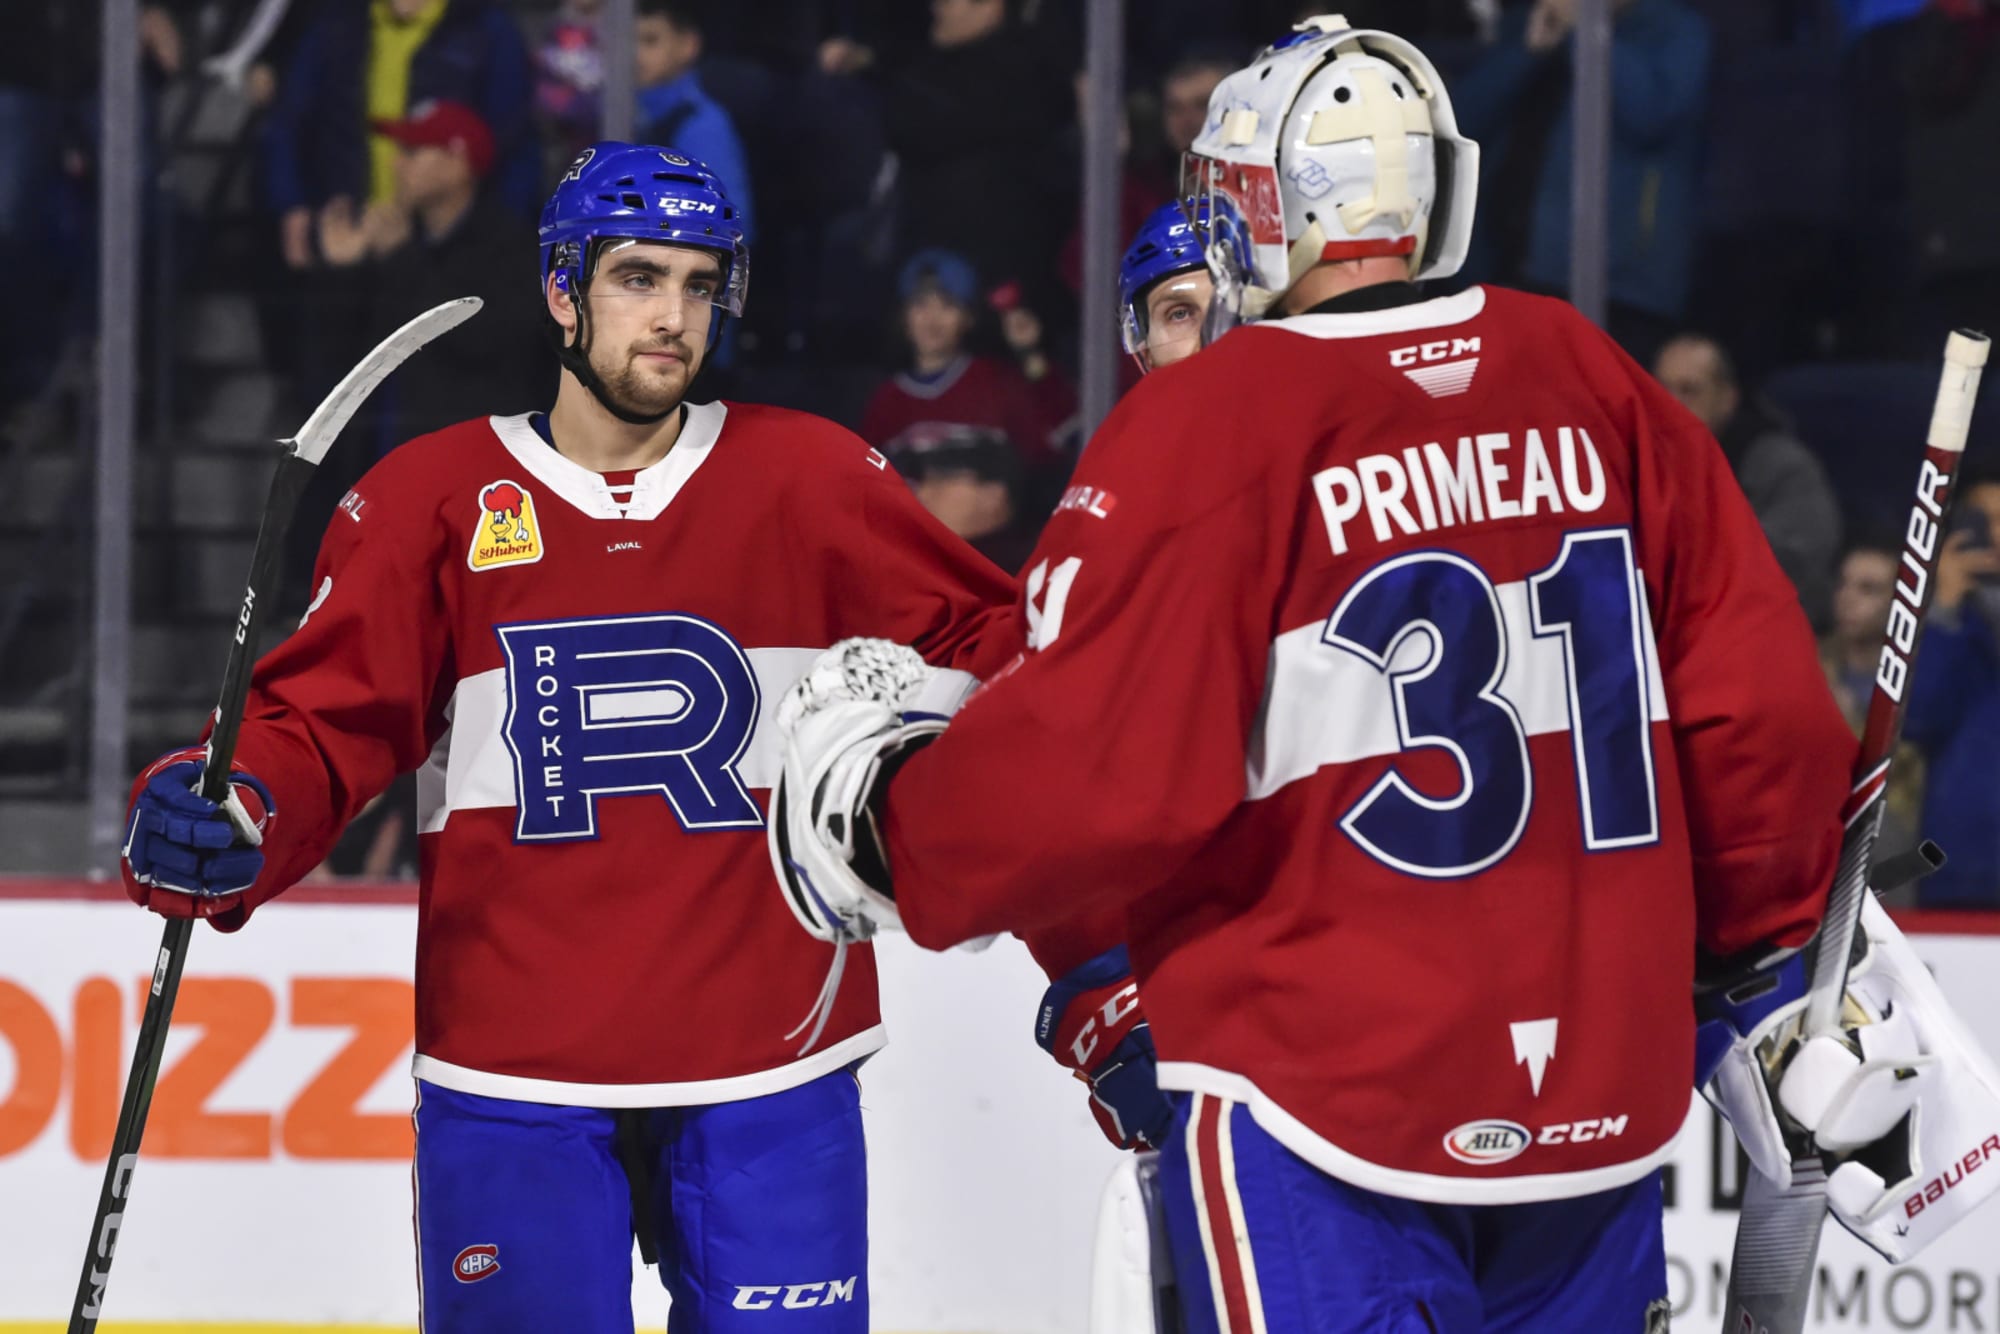 Canadiens Laval Rocket Finally Have a Schedule